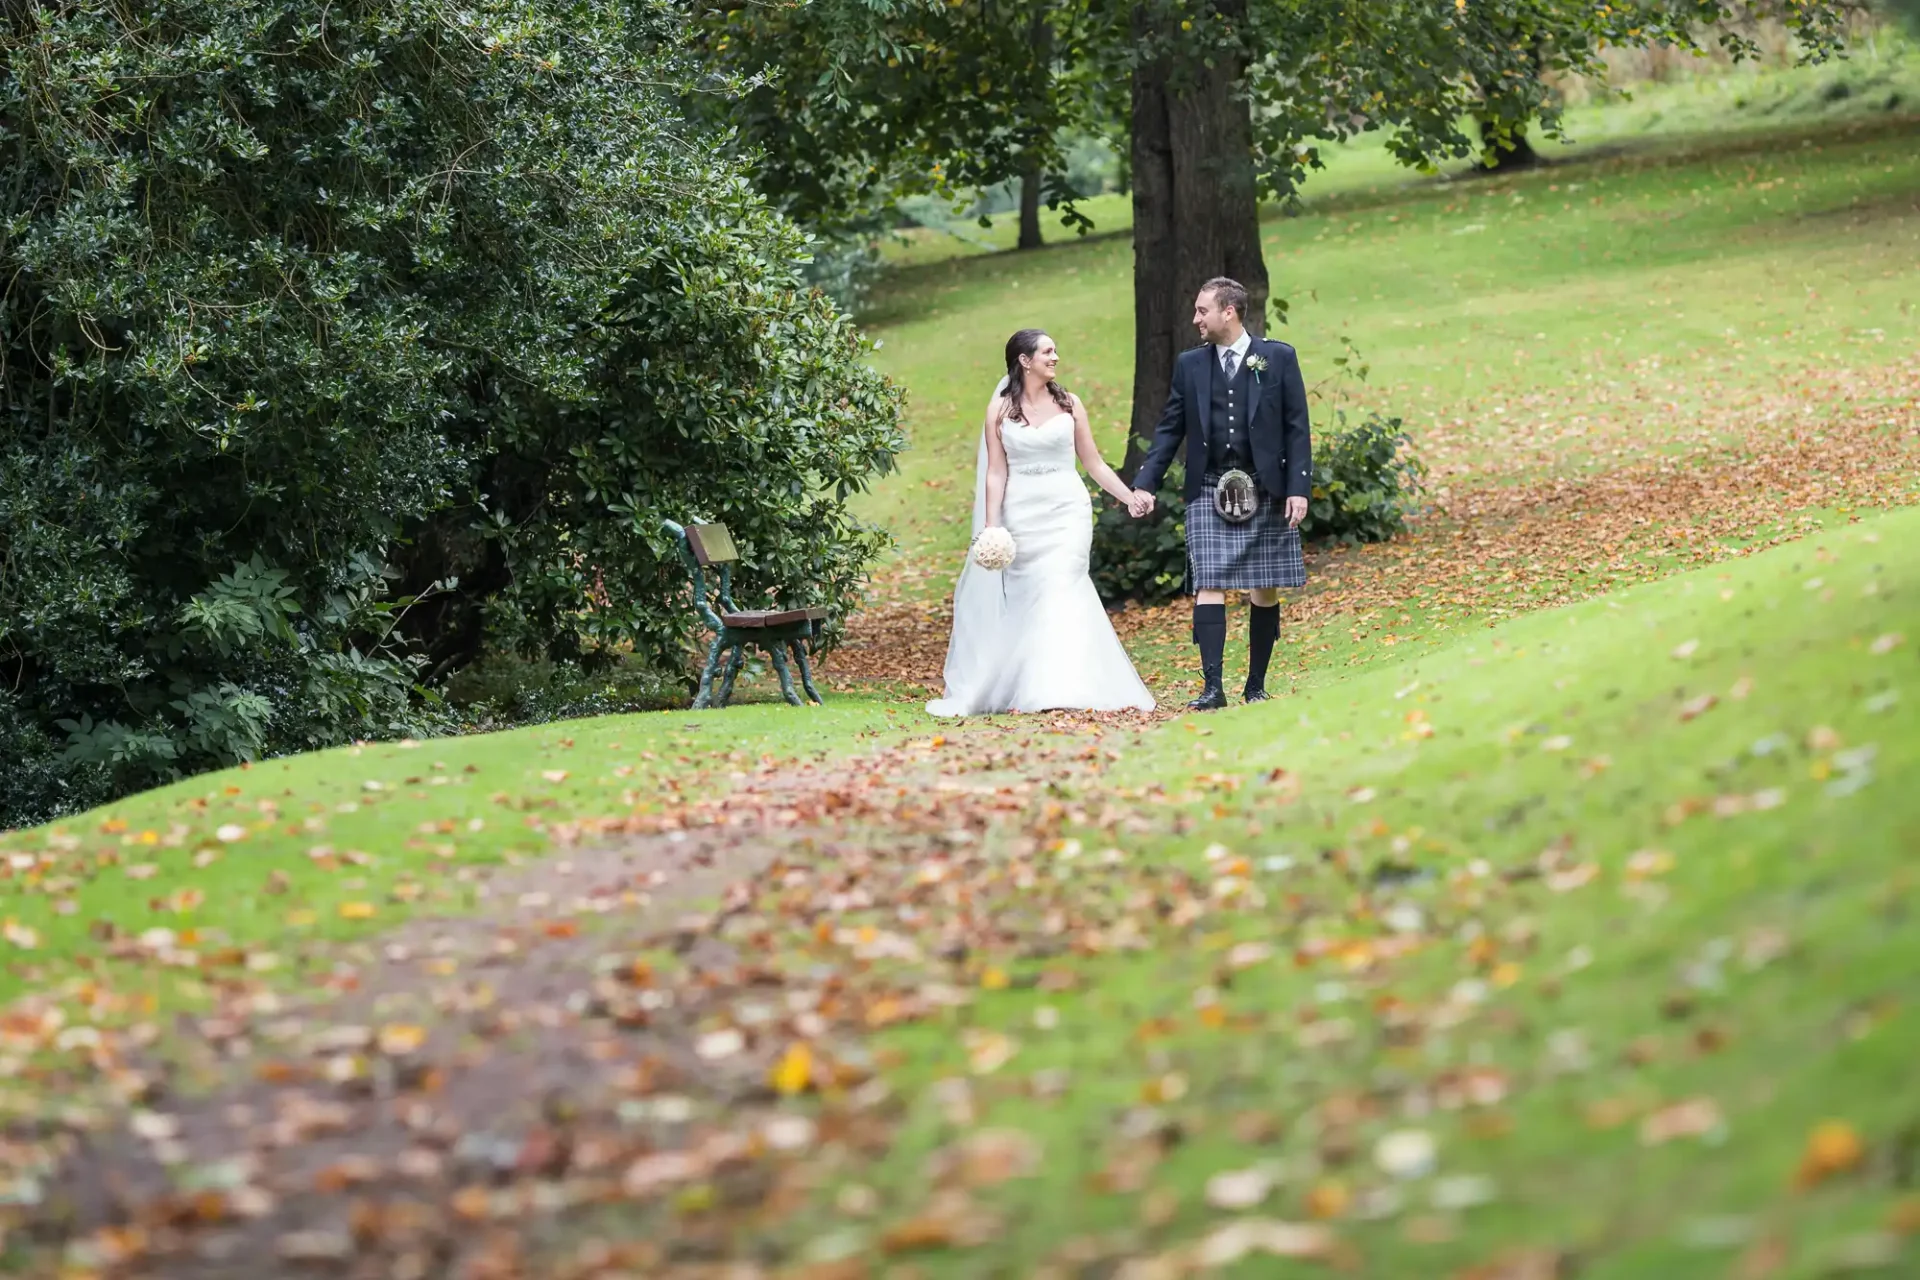 A bride and groom walking hand-in-hand in a lush park, with the groom wearing a kilt and the bride in a white gown.